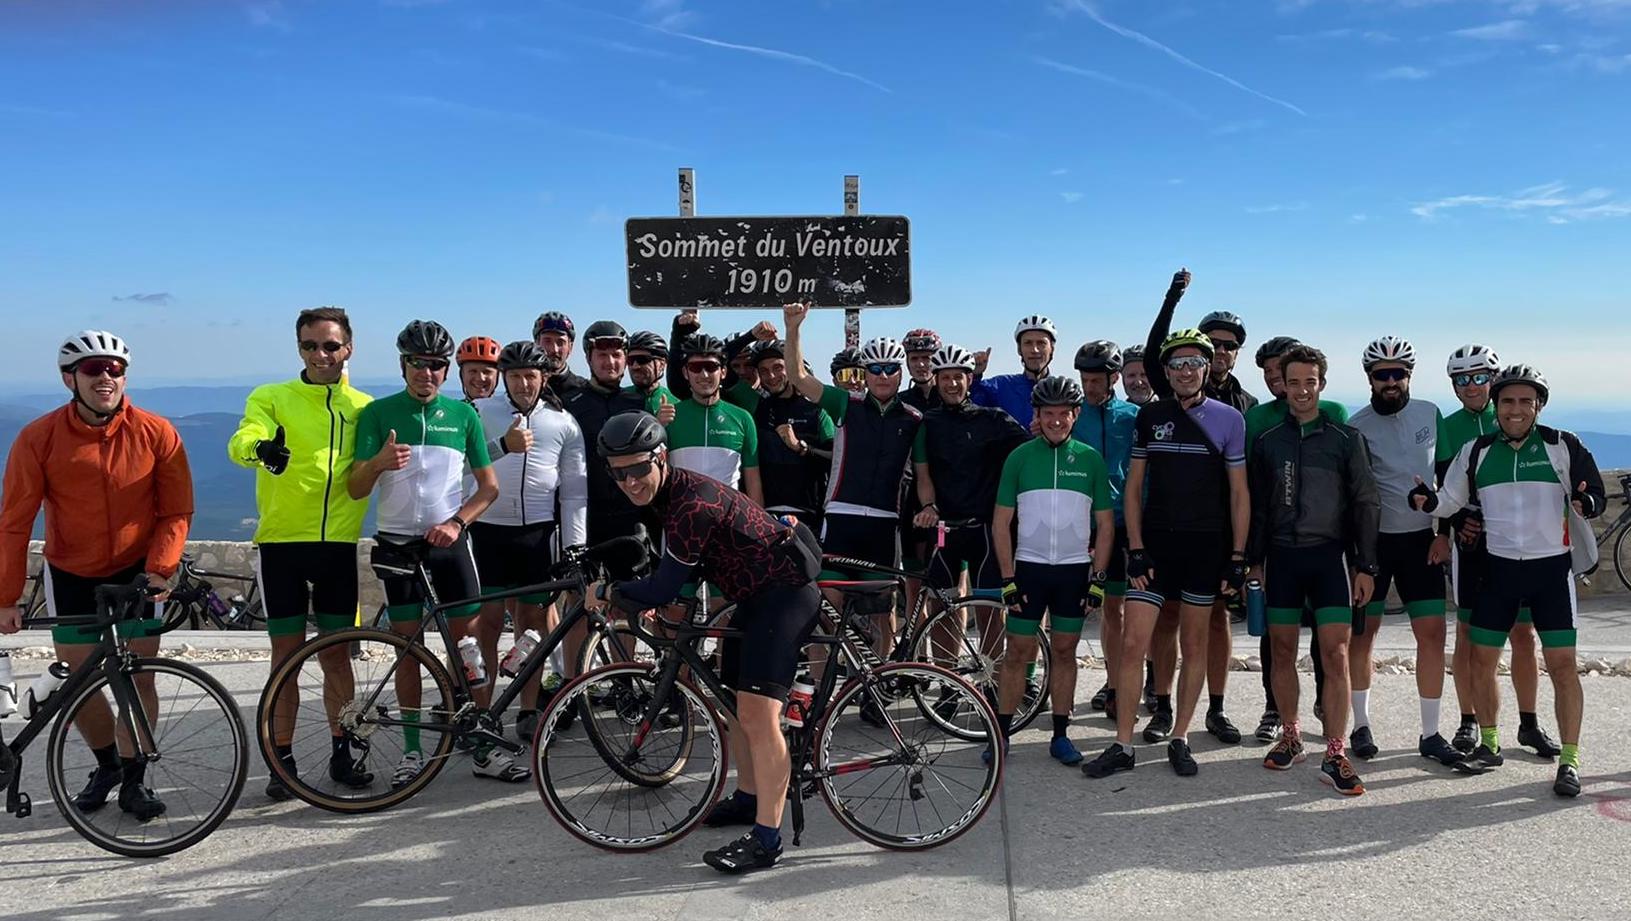 Fietsreis 2gether to the Ventoux - Luminus (Go4Cycling)